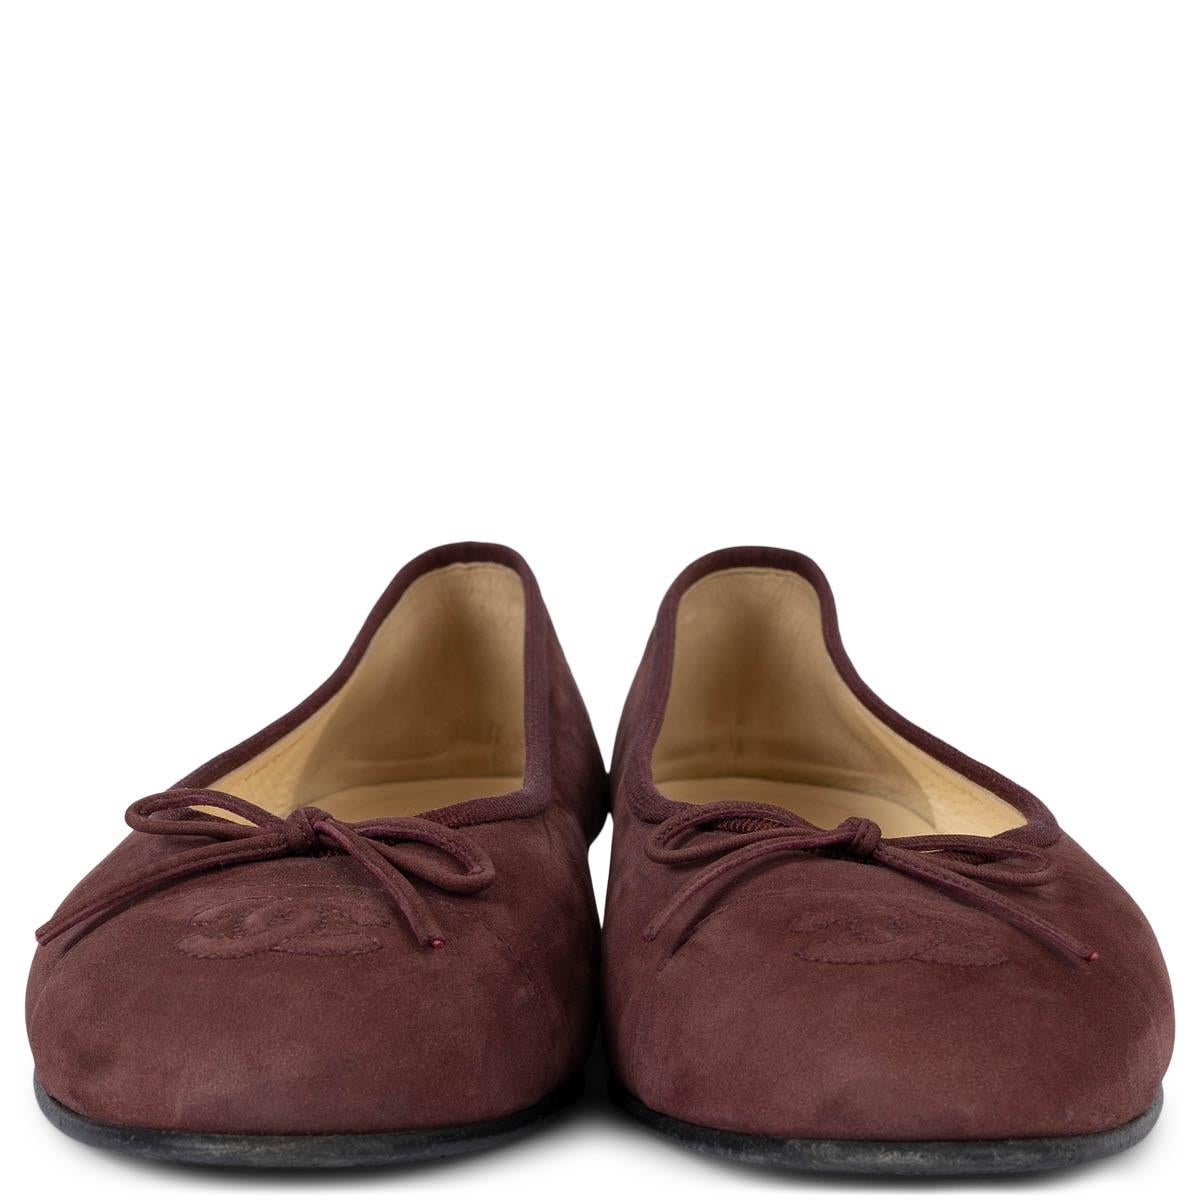 100% authentic Chanel classic ballet flats in burgundy suede leather. Have been worn and are in excellent condition. 

Measurements
Imprinted Size	39.5
Shoe Size	39
Inside Sole	25.5cm (9.9in)
Width	8cm (3.1in)
Heel	1cm (0.4in)

All our listings